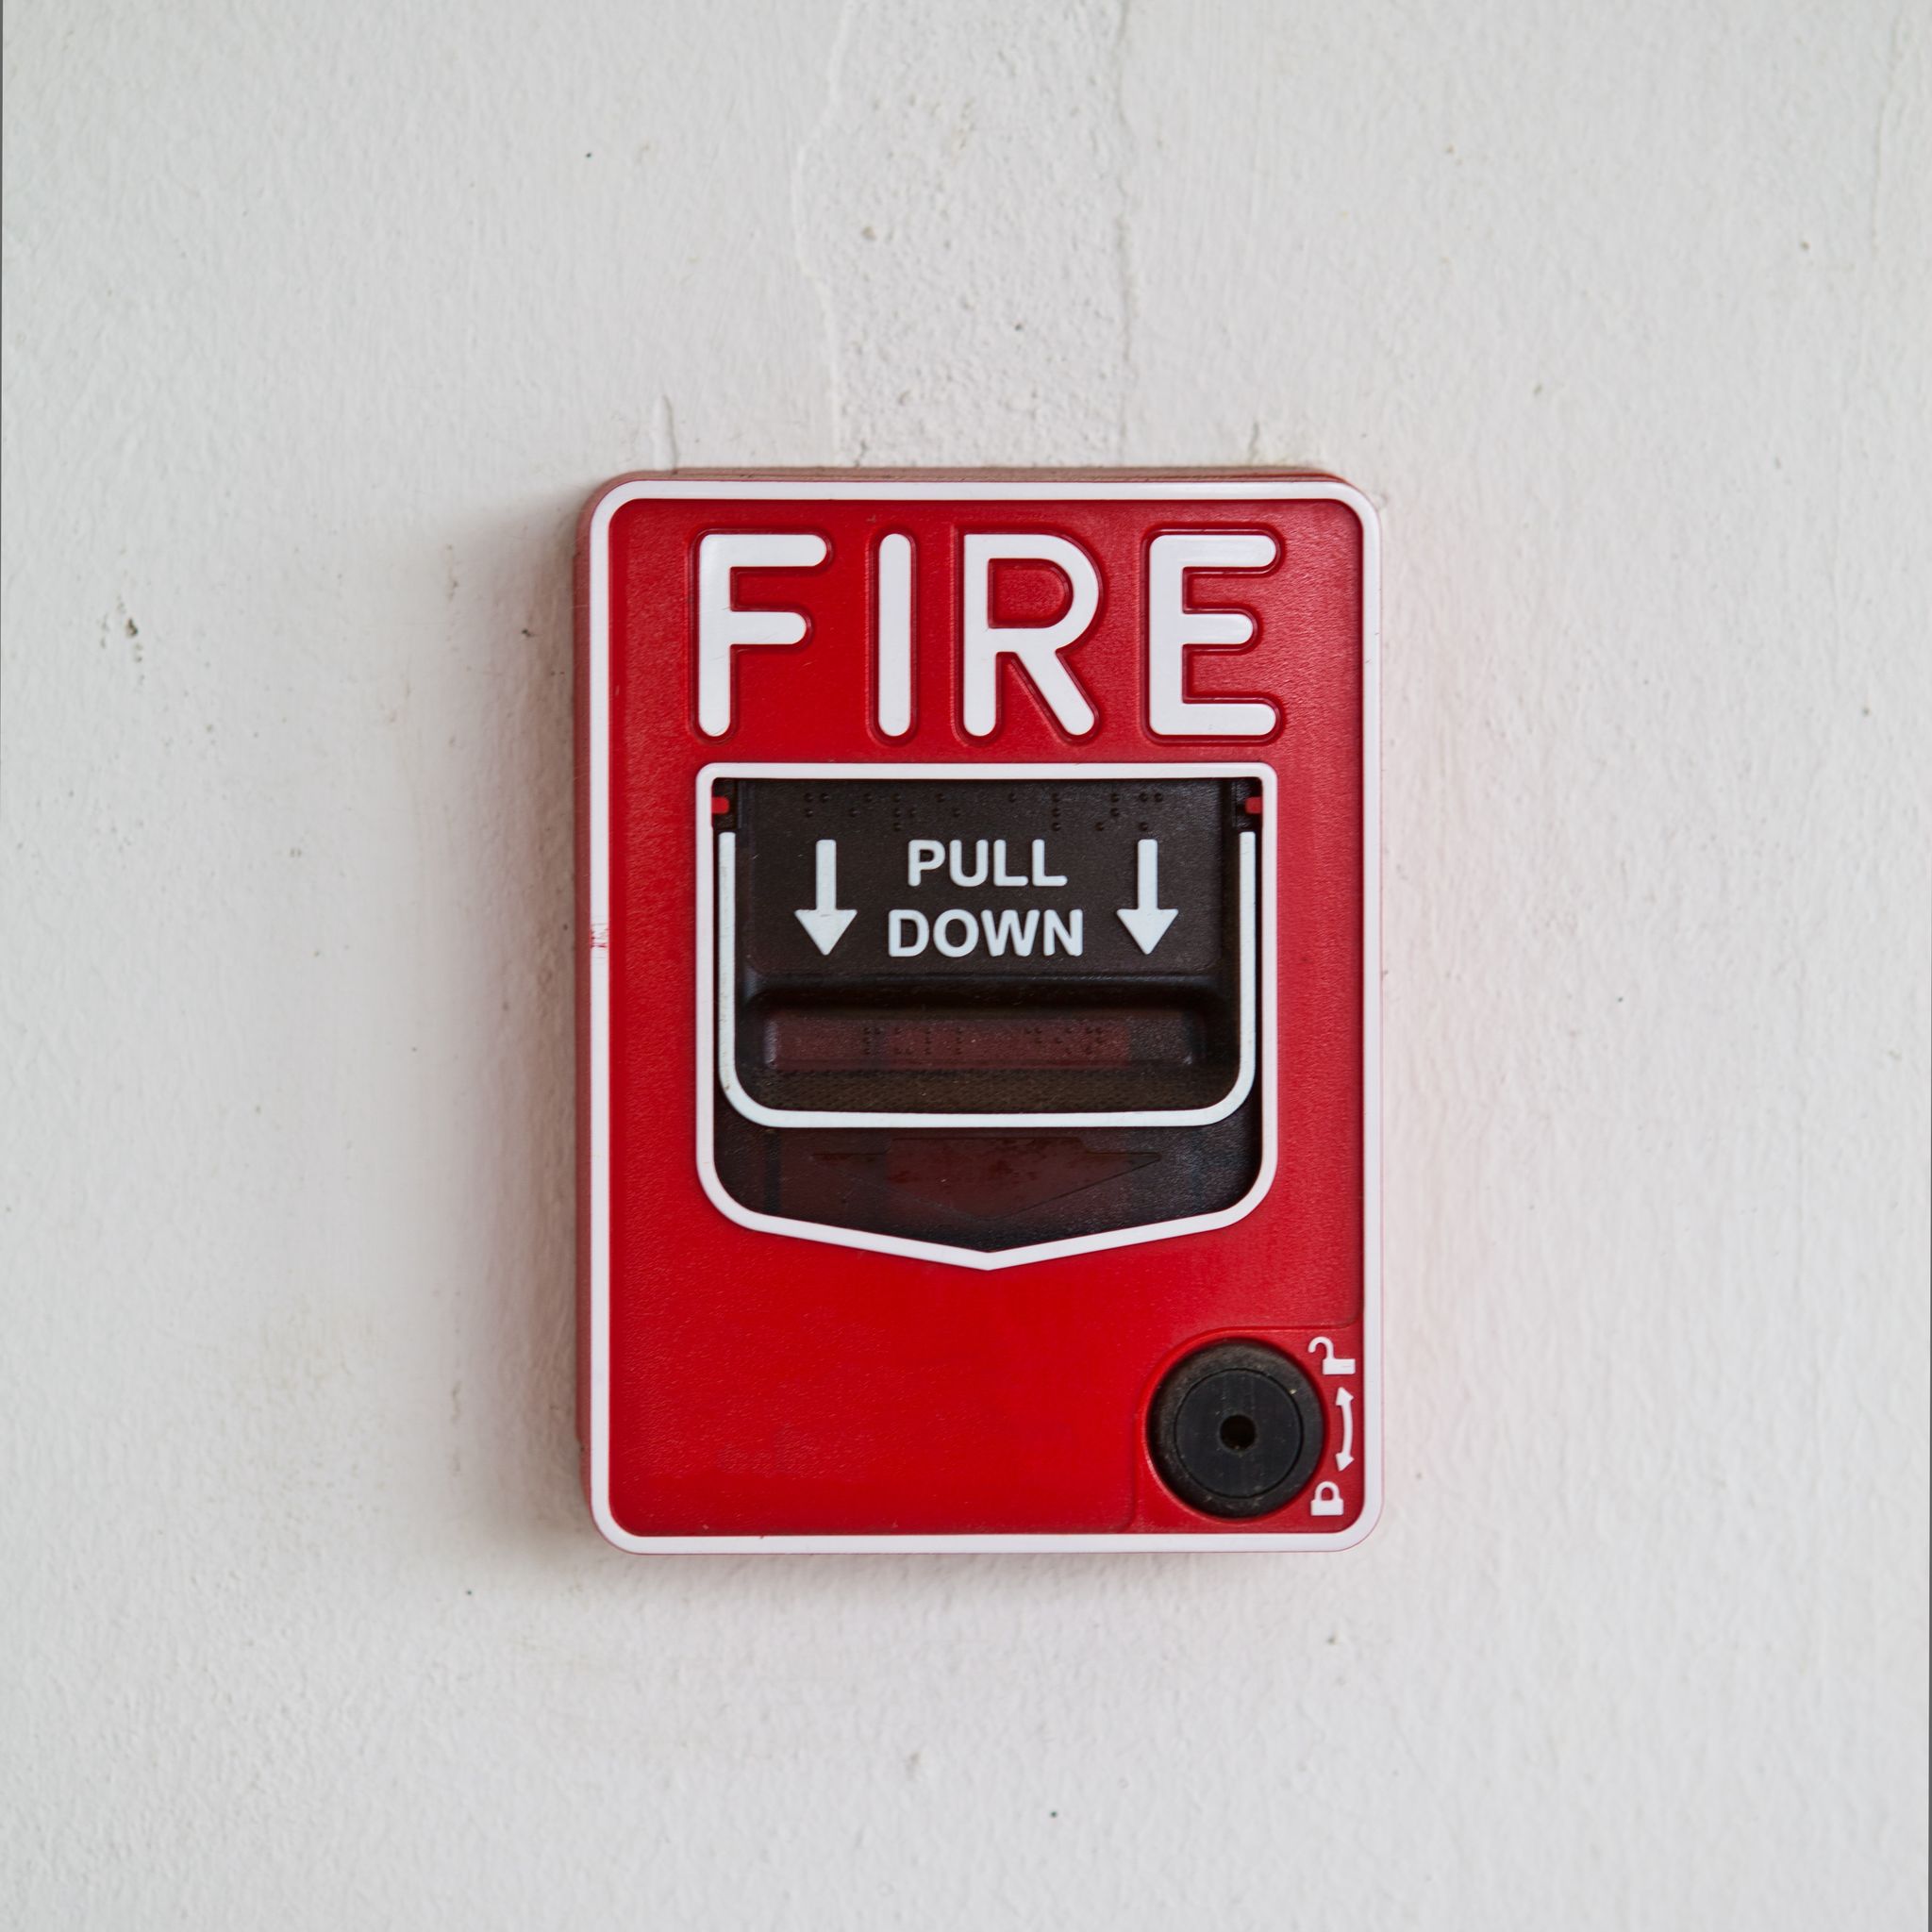 Companies That Perform Fire Inspection Services for All Your Fire Equipment Provide Invaluable Services